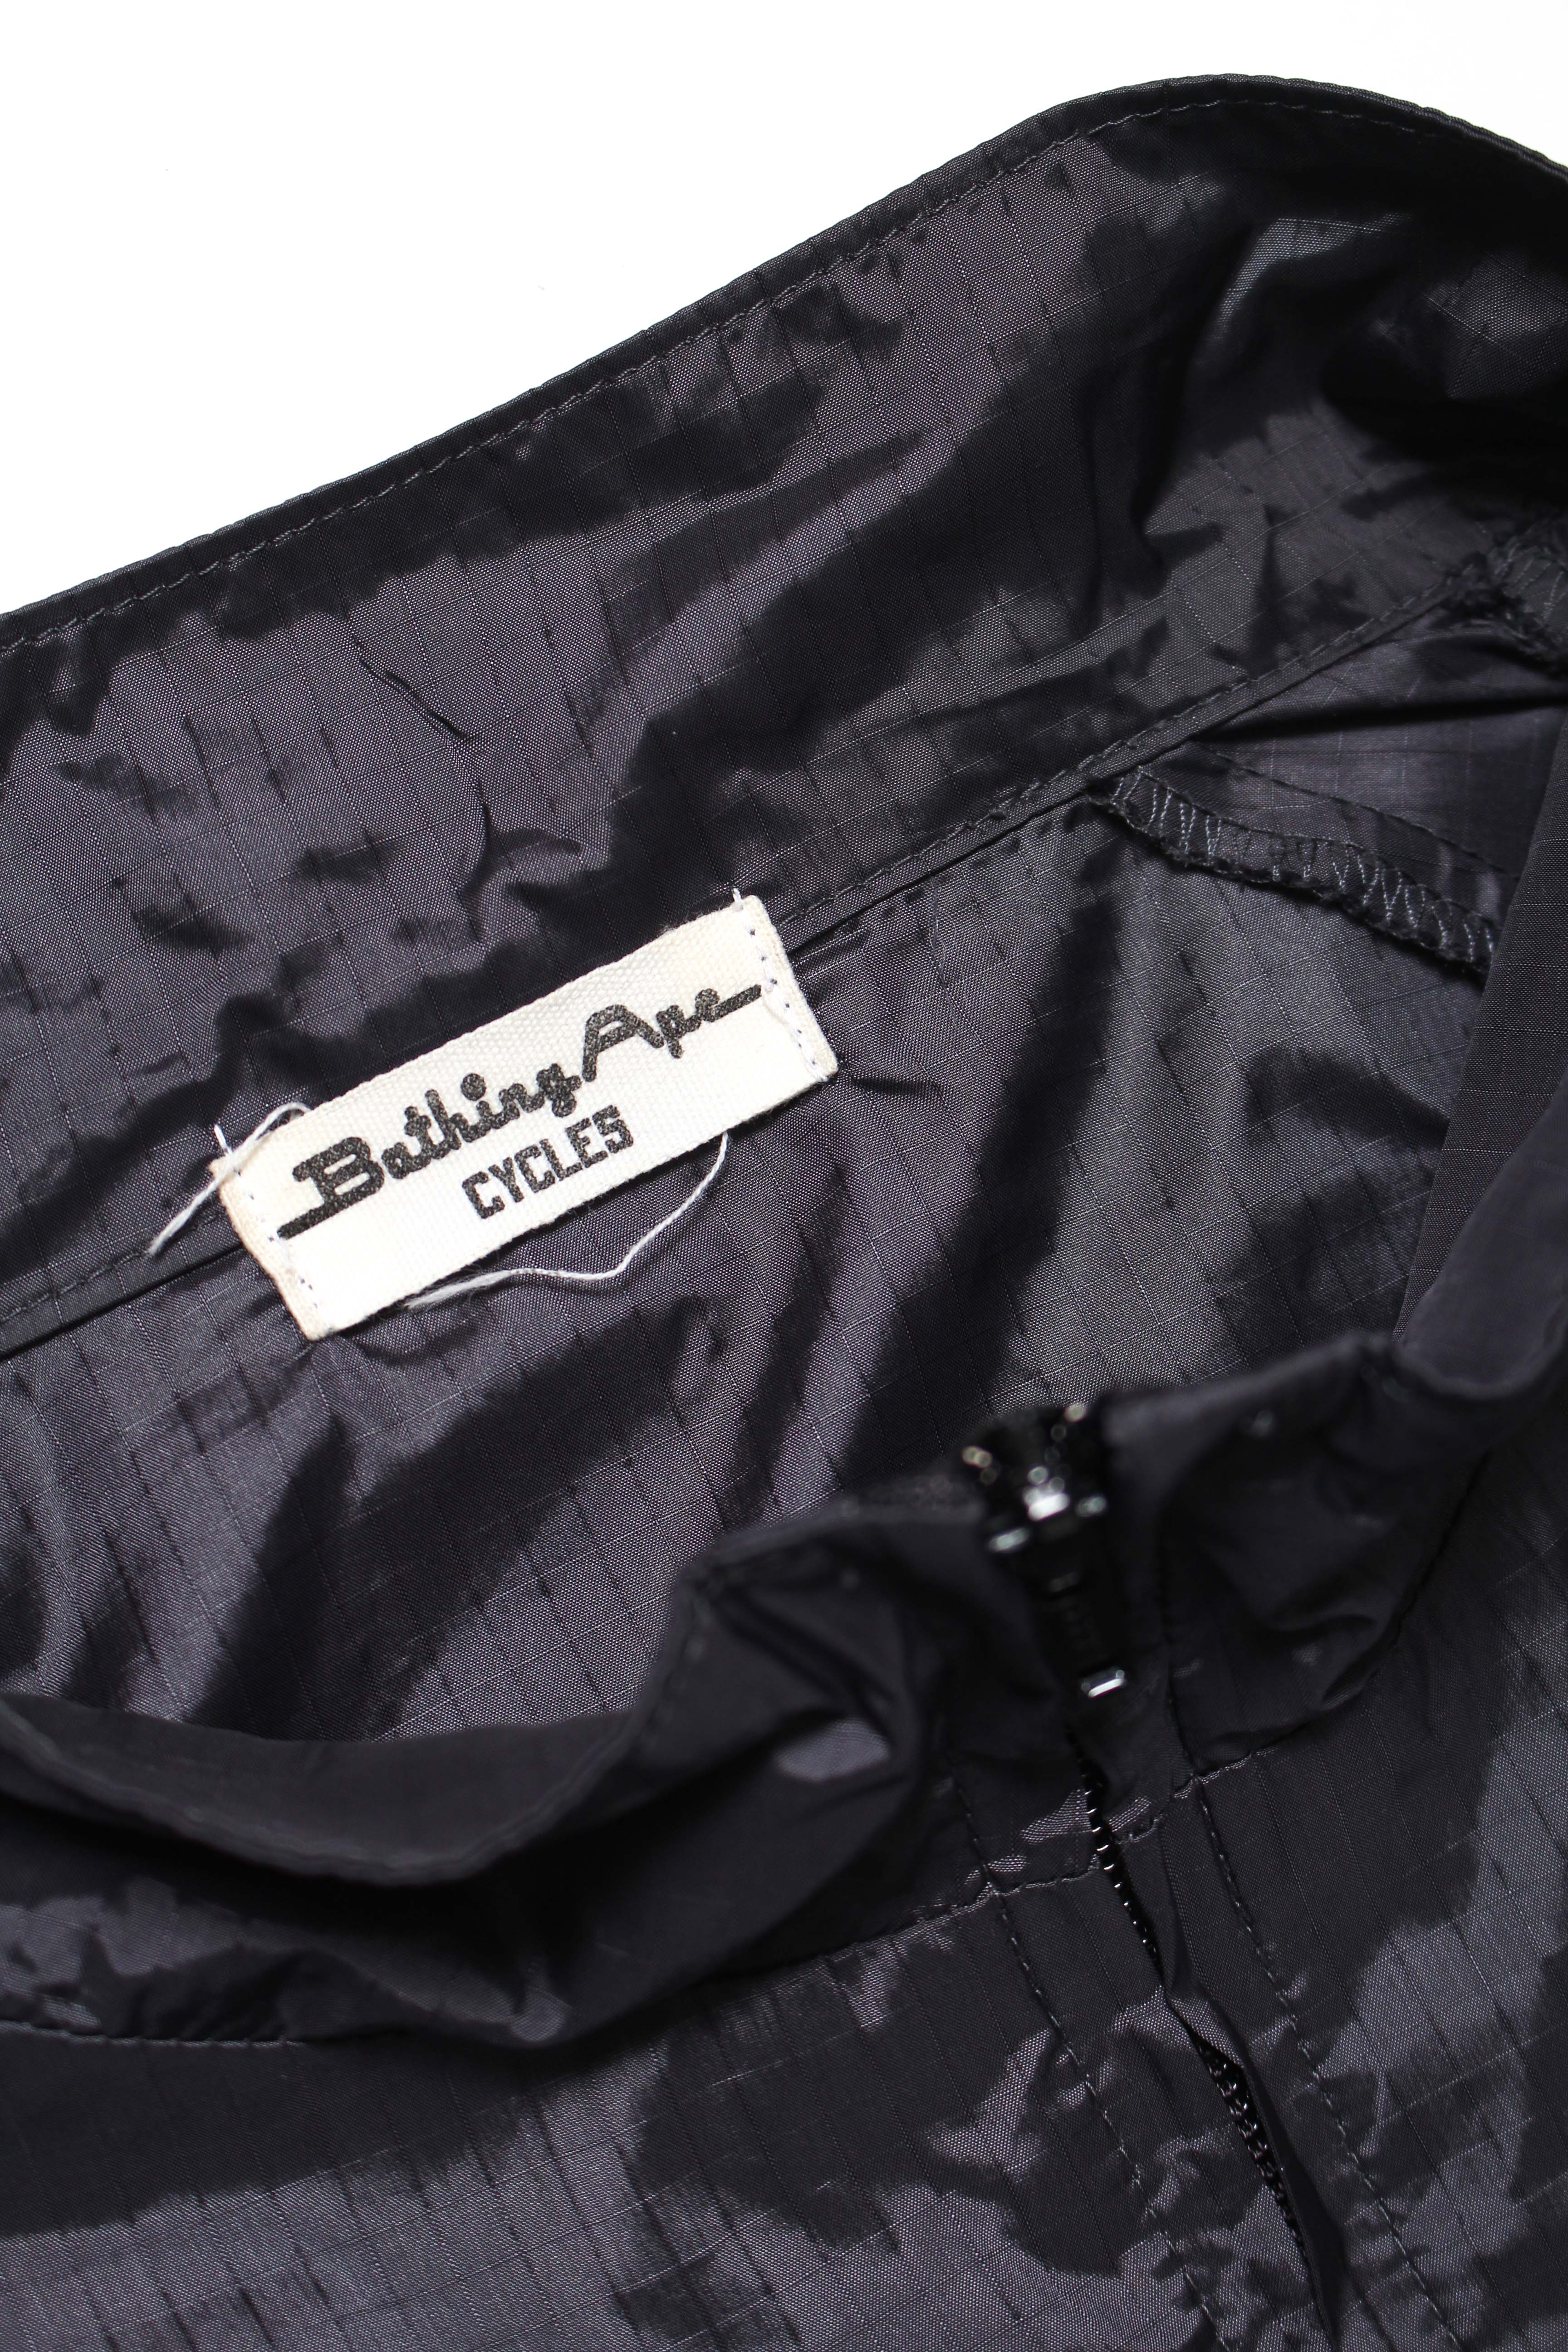 A BATHING APE CYCLE JKT 90s – C30 - BOW WOW, RECOGNIZE